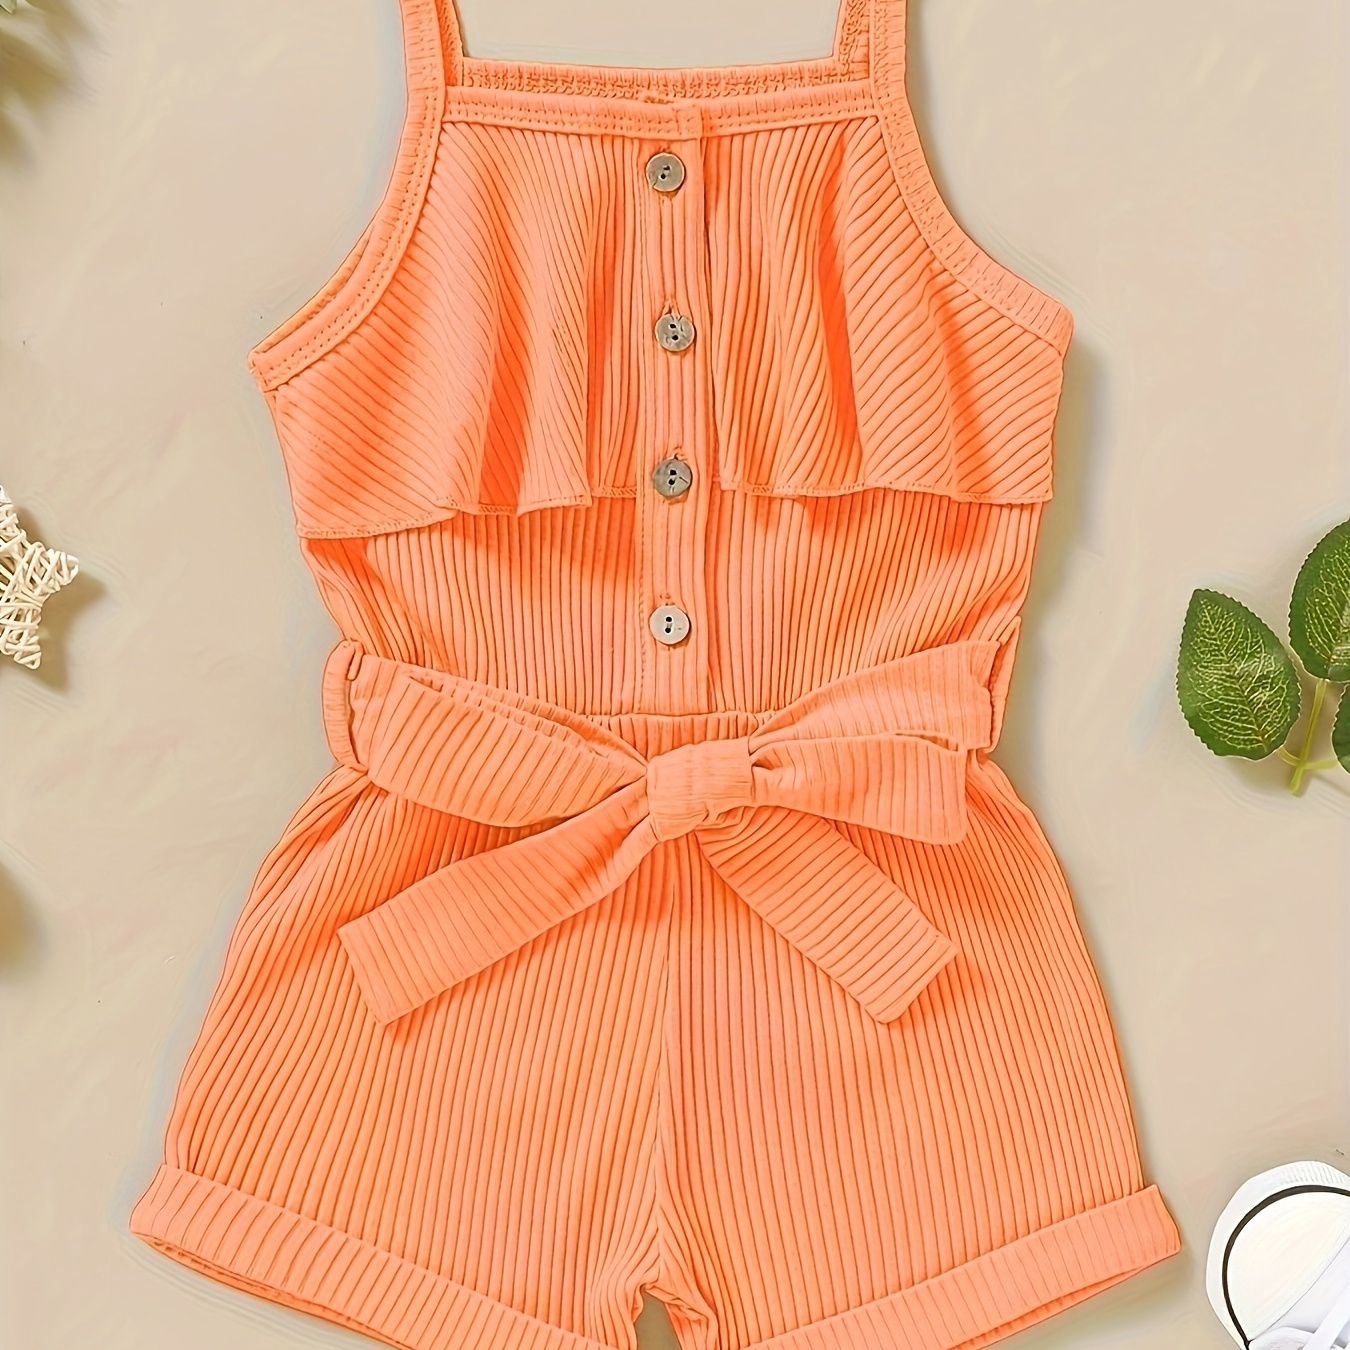 

Baby's Solid Color Ruffle Decor Belted Bodysuit, Casual Ribbed Cotton Sleeveless Romper, Toddler & Infant Girl's Onesie For Summer, As Gift